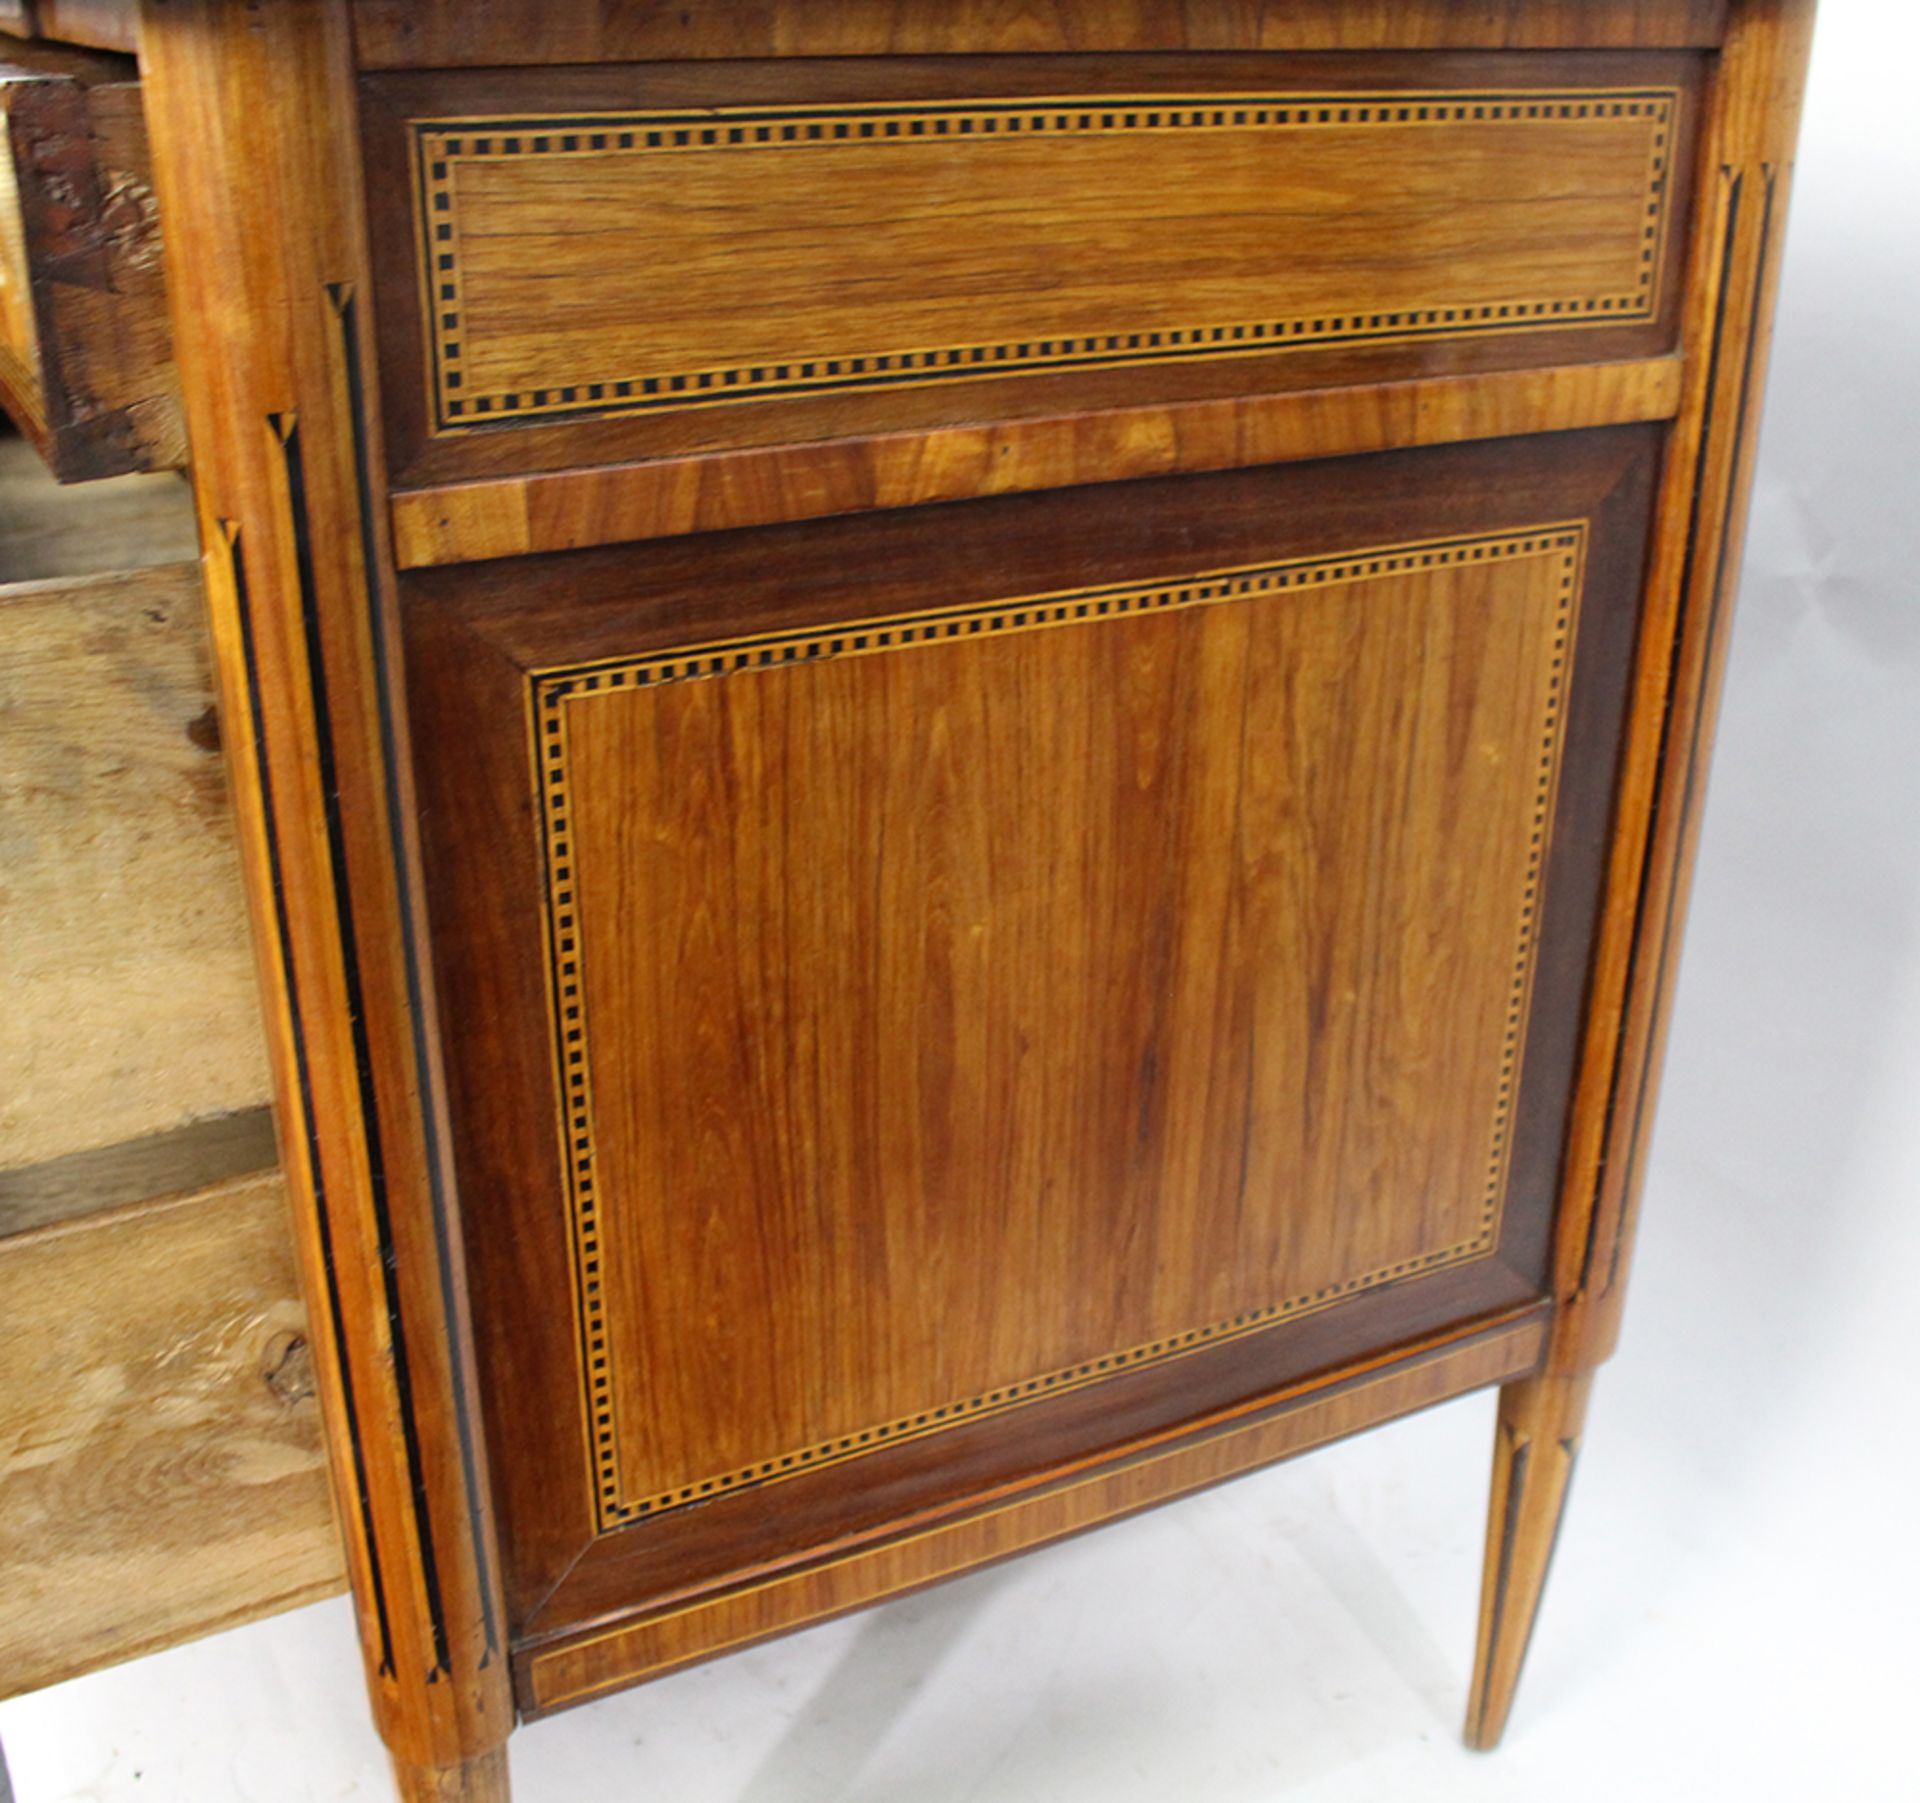 18th c. Inlaid Marble Topped Commode - Image 12 of 14